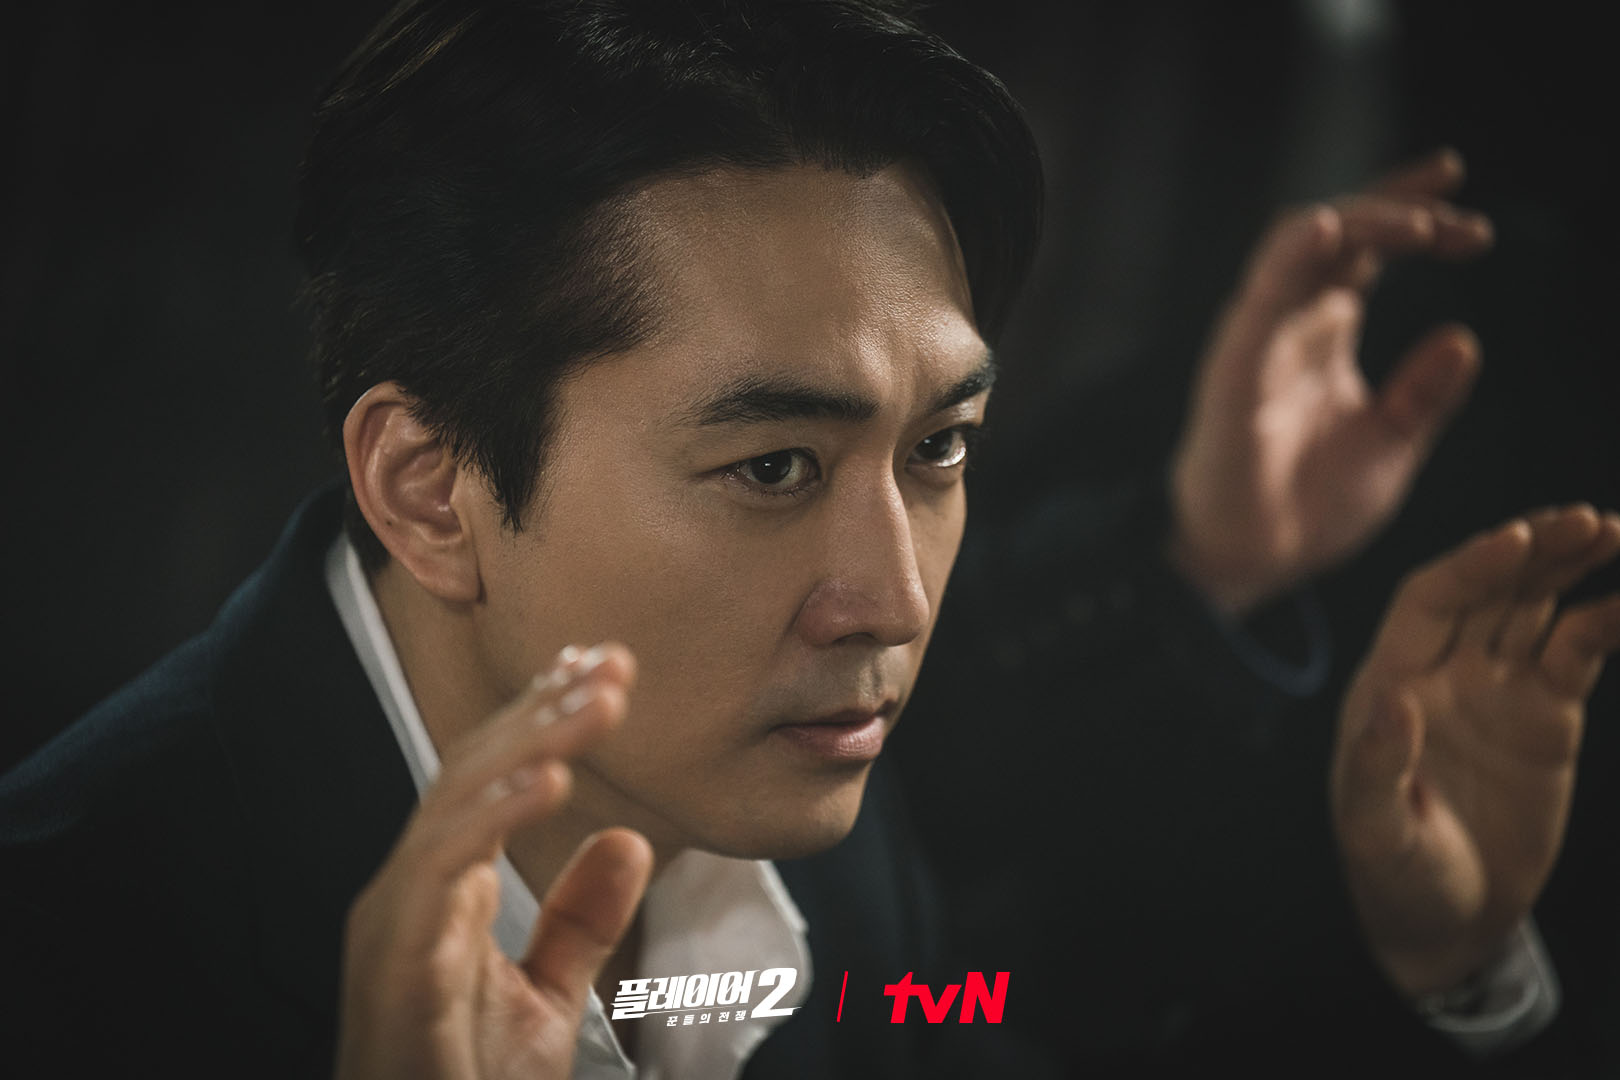 Song Seung Heon And Lee Si Eon Fall Into Oh Yeon Seo’s Trap In “The Player 2: Master Of Swindlers”